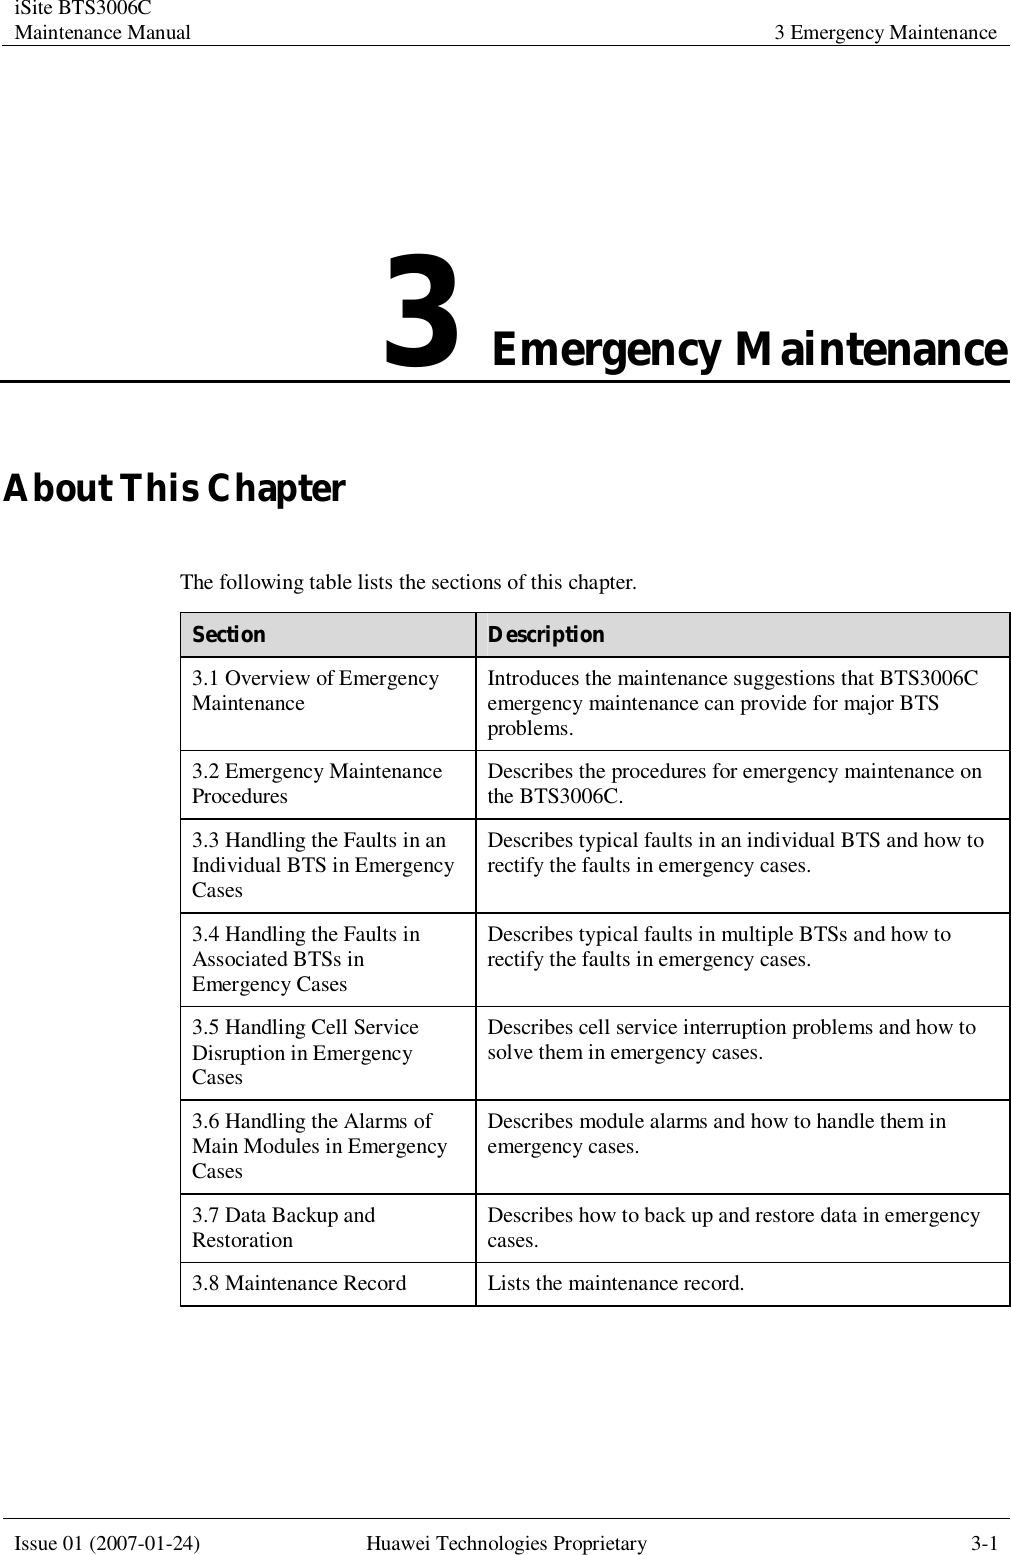 iSite BTS3006C Maintenance Manual 3 Emergency Maintenance  Issue 01 (2007-01-24) Huawei Technologies Proprietary 3-1  3 Emergency Maintenance About This Chapter The following table lists the sections of this chapter. Section  Description 3.1 Overview of Emergency Maintenance  Introduces the maintenance suggestions that BTS3006C emergency maintenance can provide for major BTS problems. 3.2 Emergency Maintenance Procedures  Describes the procedures for emergency maintenance on the BTS3006C. 3.3 Handling the Faults in an Individual BTS in Emergency Cases Describes typical faults in an individual BTS and how to rectify the faults in emergency cases. 3.4 Handling the Faults in Associated BTSs in Emergency Cases Describes typical faults in multiple BTSs and how to rectify the faults in emergency cases. 3.5 Handling Cell Service Disruption in Emergency Cases Describes cell service interruption problems and how to solve them in emergency cases. 3.6 Handling the Alarms of Main Modules in Emergency Cases Describes module alarms and how to handle them in emergency cases. 3.7 Data Backup and Restoration  Describes how to back up and restore data in emergency cases. 3.8 Maintenance Record Lists the maintenance record.  